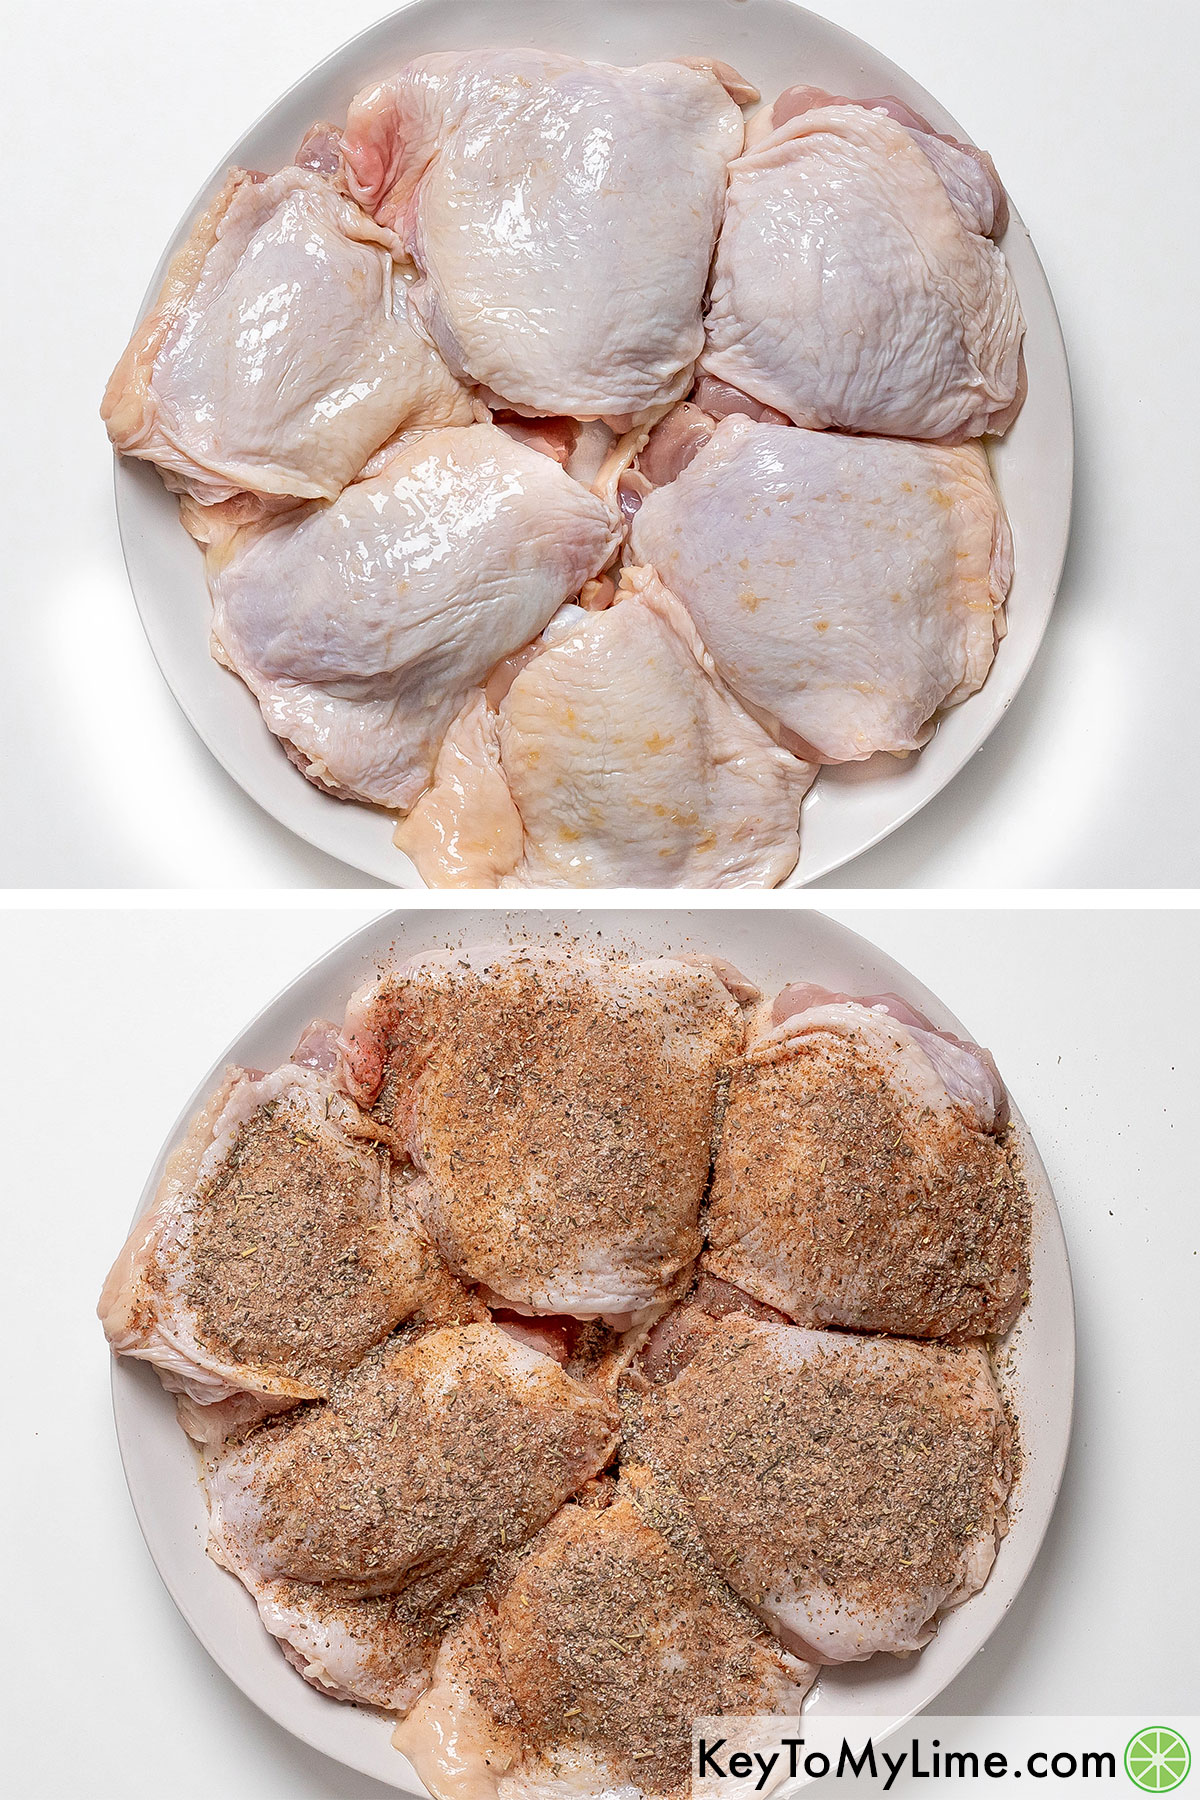 Rubbing the oil on the chicken thighs then evenly coating with seasonings.